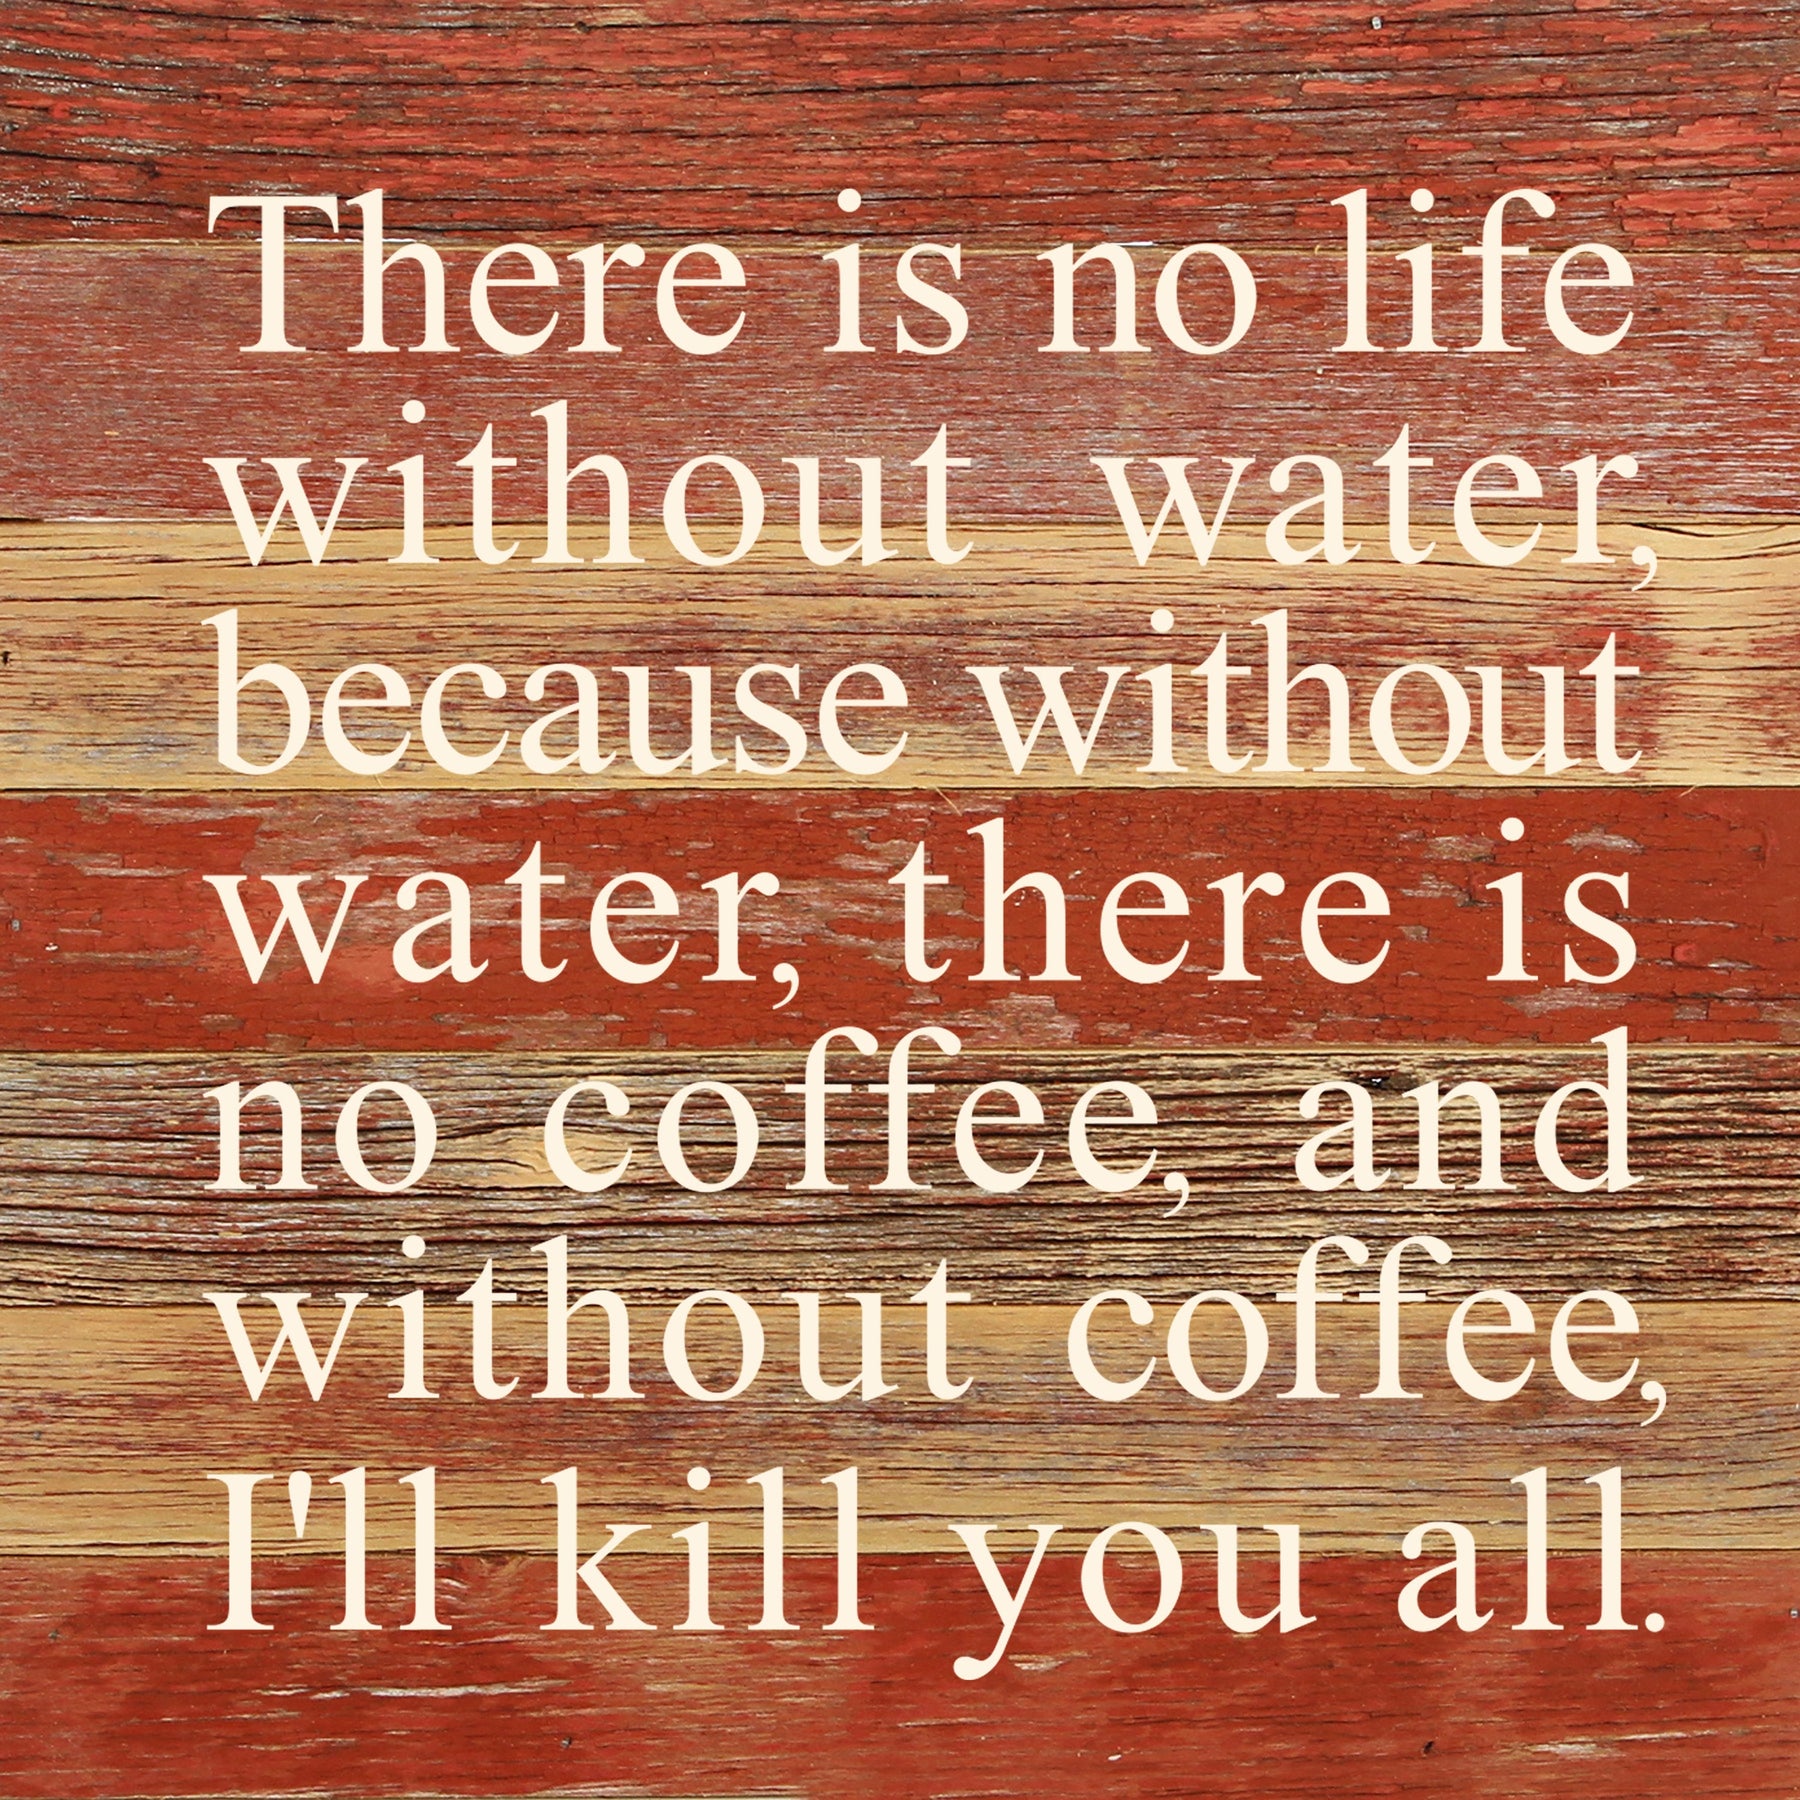 There is no life without water, because without water, there is no coffee, and without coffee, I'll kill you all. / 10"x10" Reclaimed Wood Sign